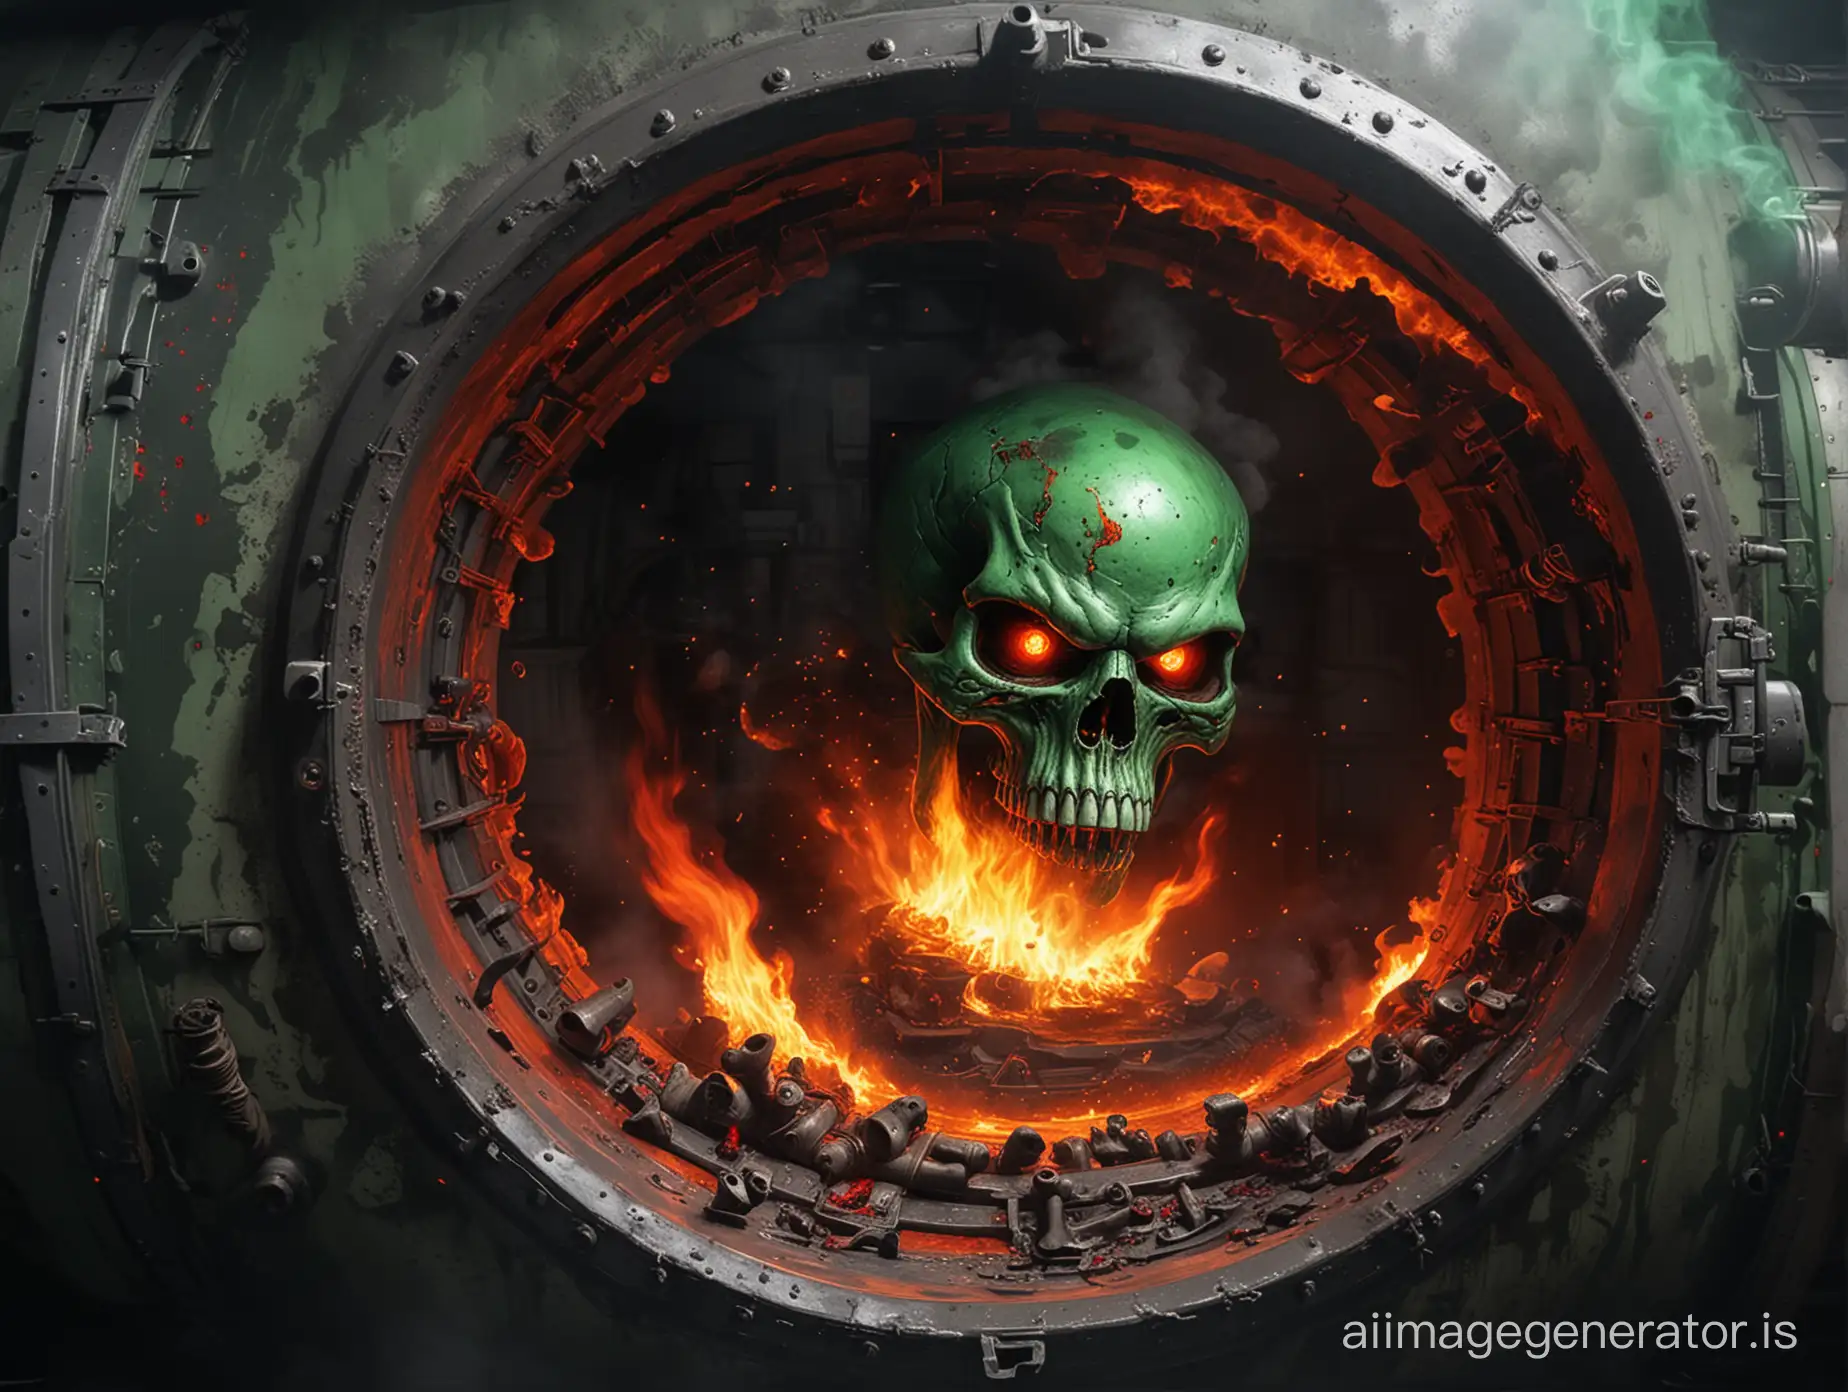 DnD green flaming skull with red eyes. hovering through an open porthole of a boiler tank. green flames, dead skeletons and bones on the floor.